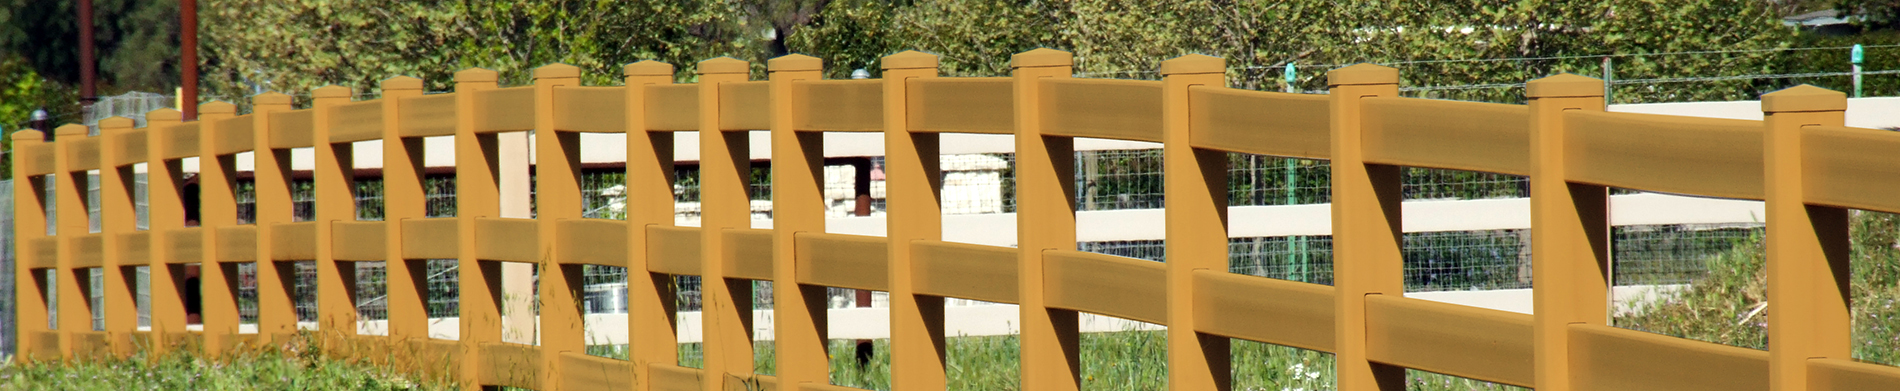 Do Fences Increase The Valuation Of Your Property?